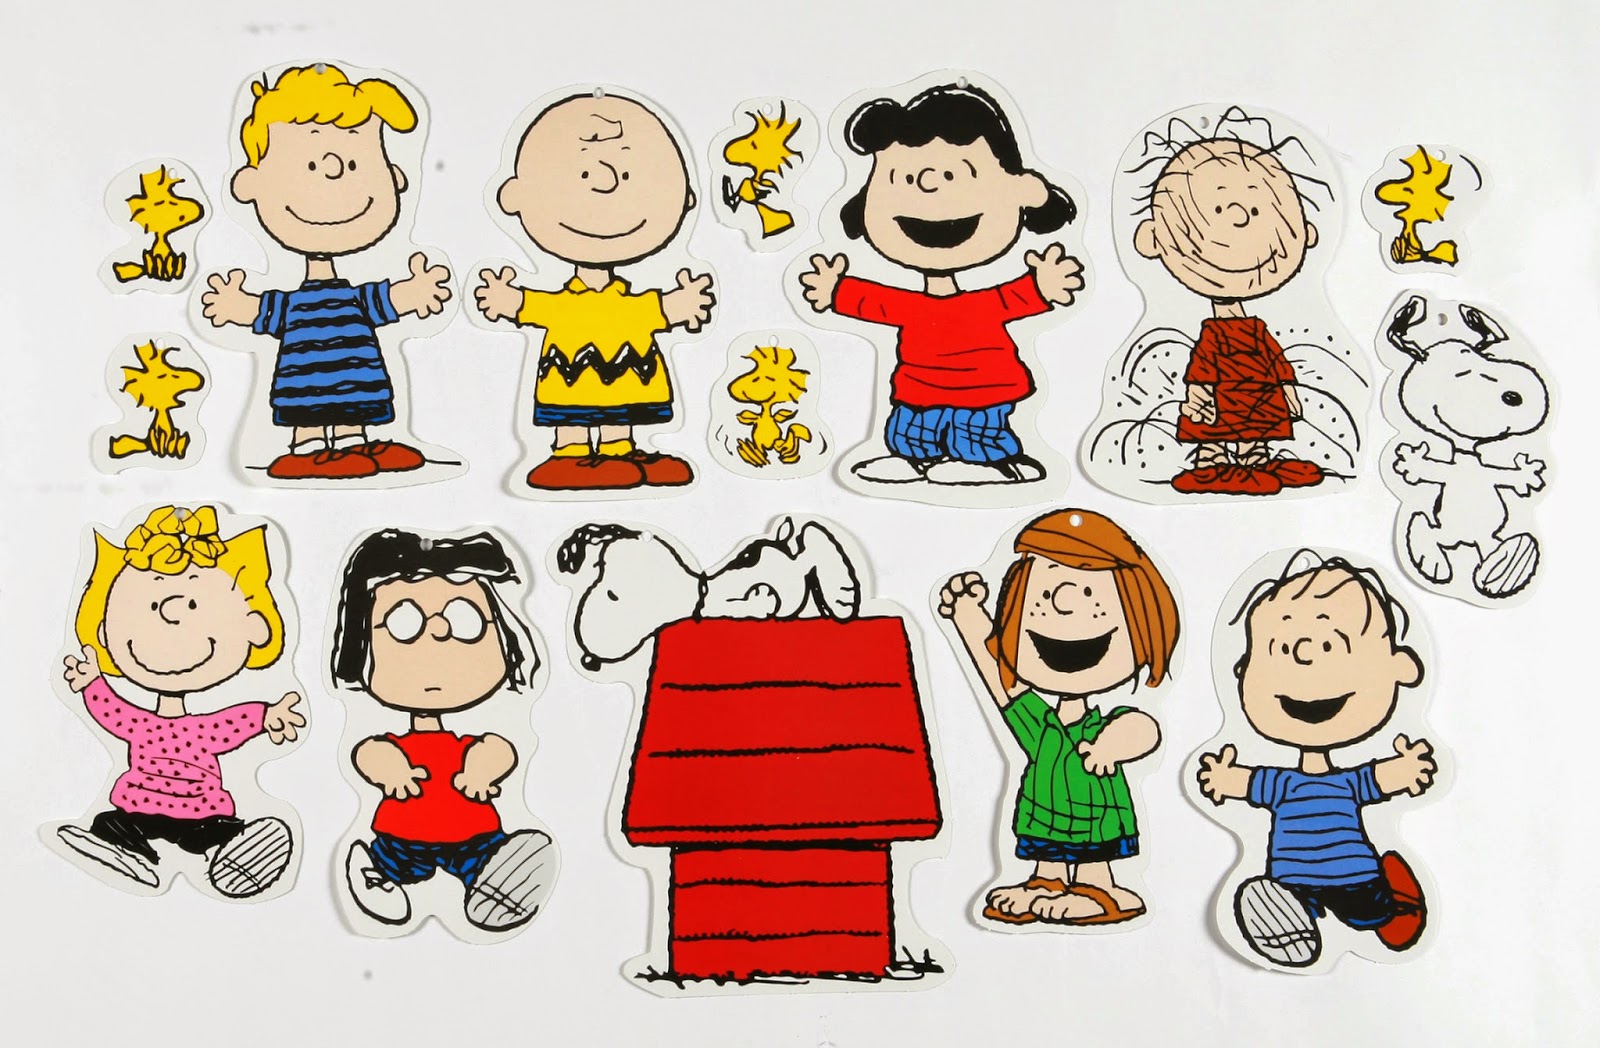 And Here Is Some Cool Peanuts Clip Art A Lot Of It For The Holiday